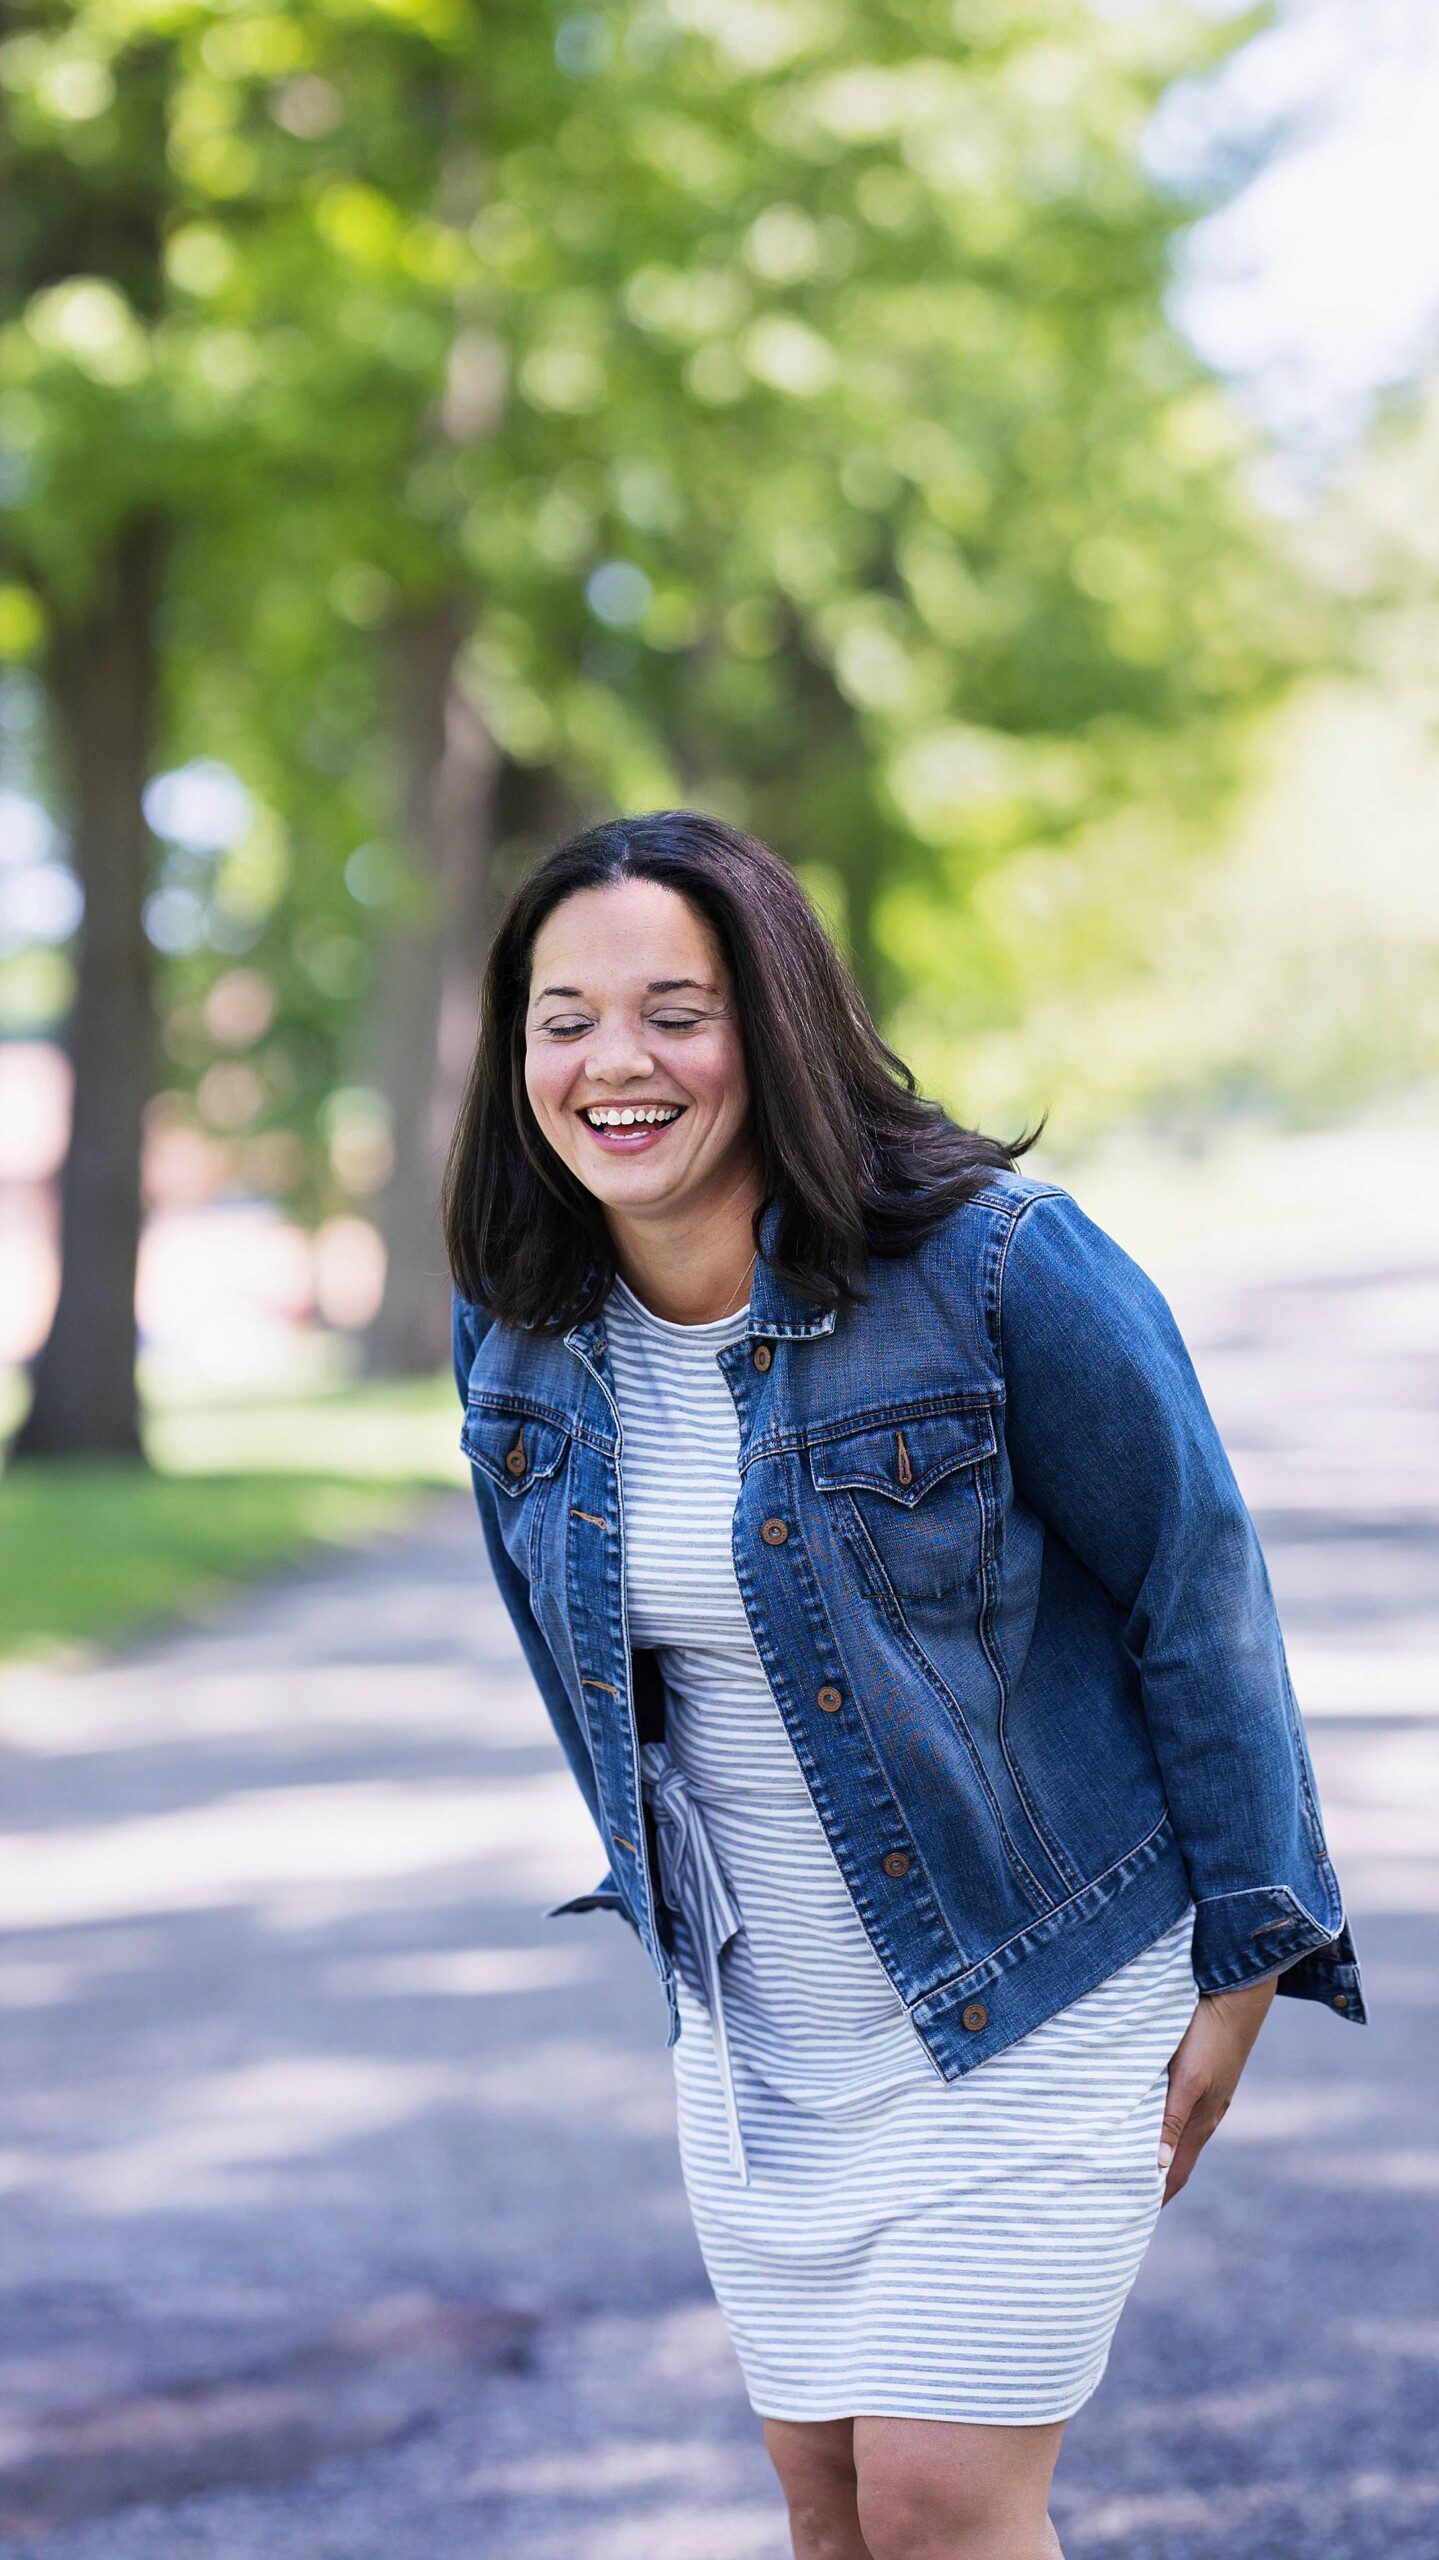 image of Pittsburgh area photographer, Rhaina Taylor. She's wearing a knit dress with a denim jacket and is laughing with her eyes closed while standing on a tree lined road.